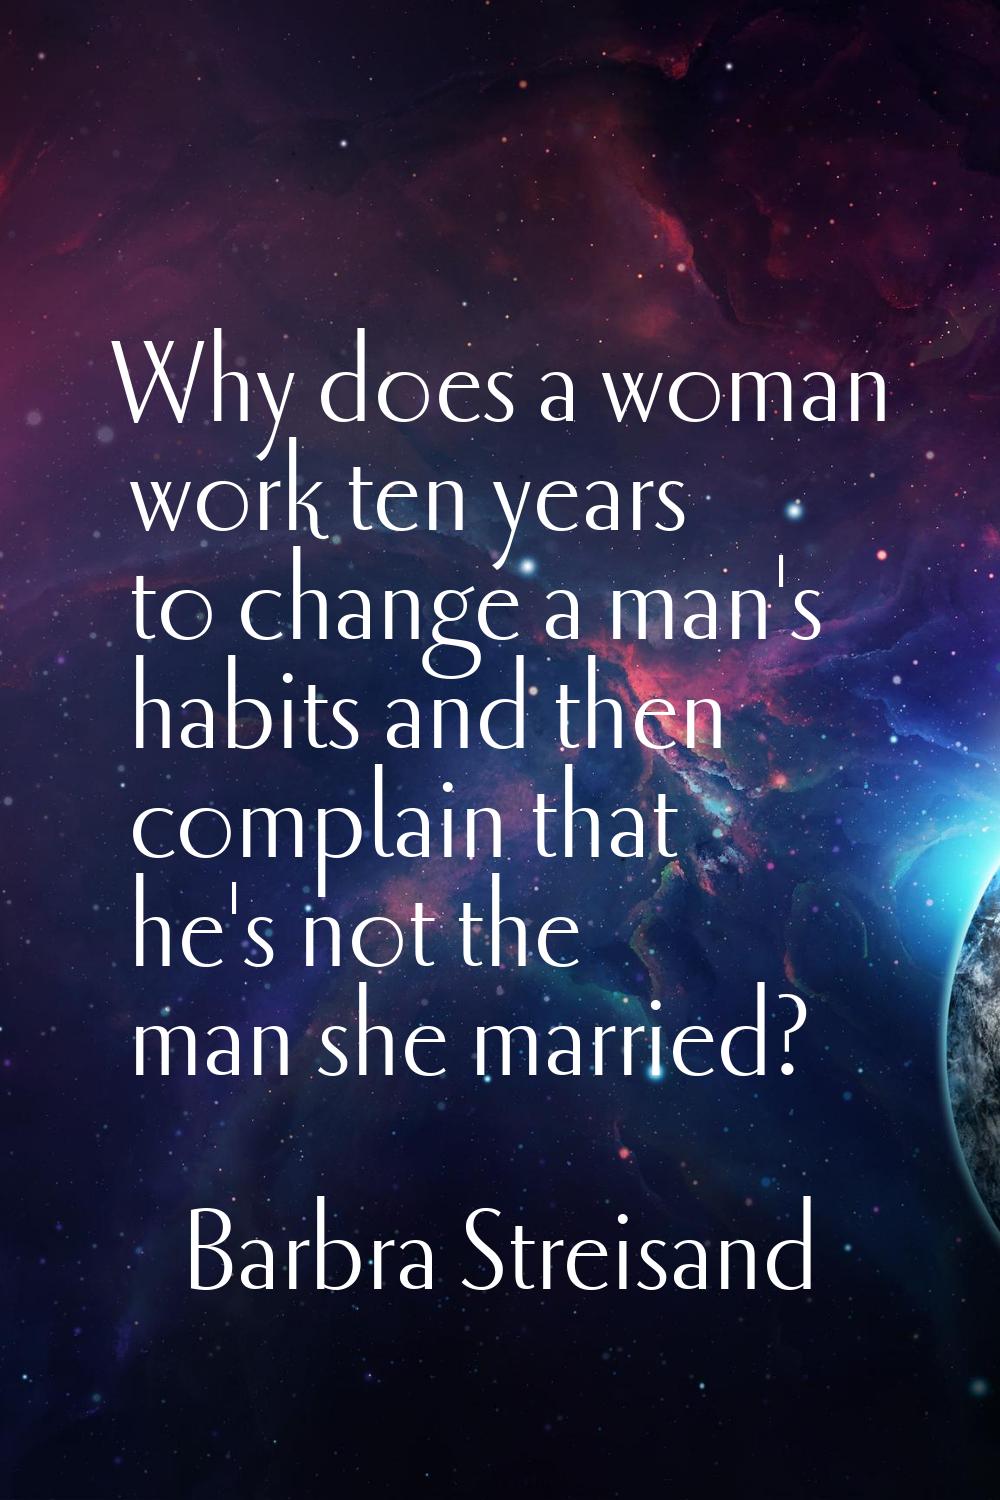 Why does a woman work ten years to change a man's habits and then complain that he's not the man sh